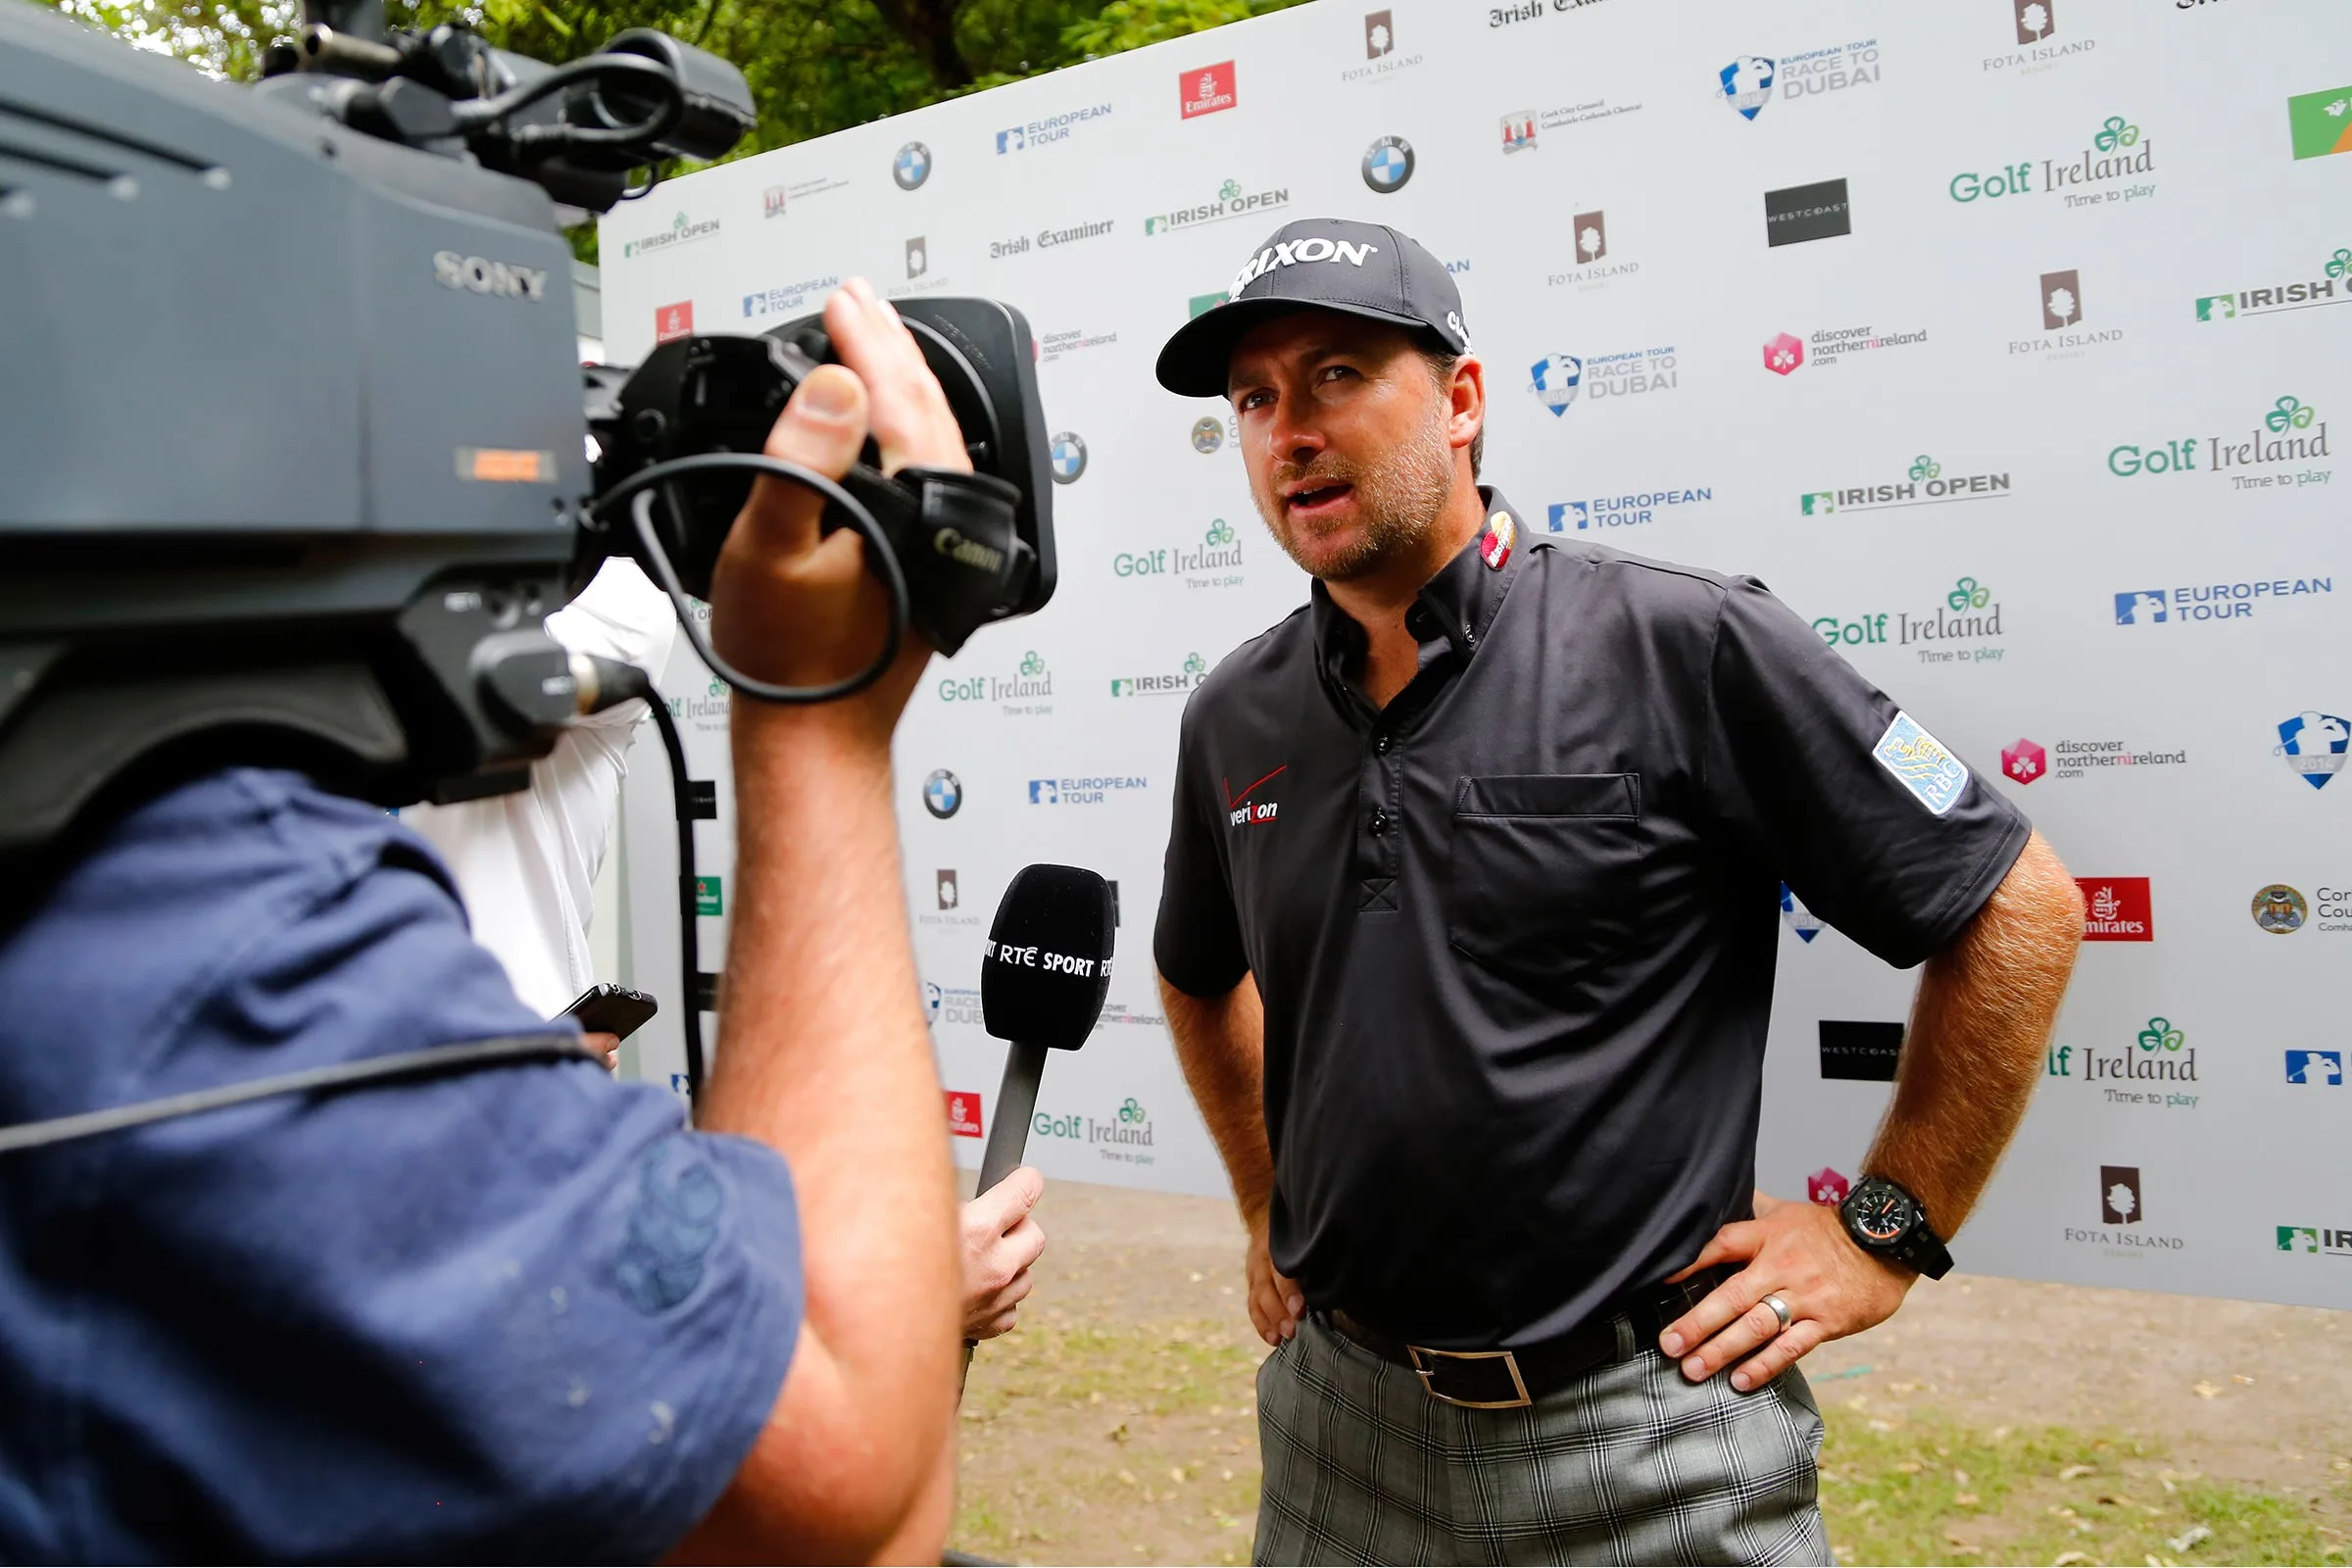 The art of interviewing a Tour pro